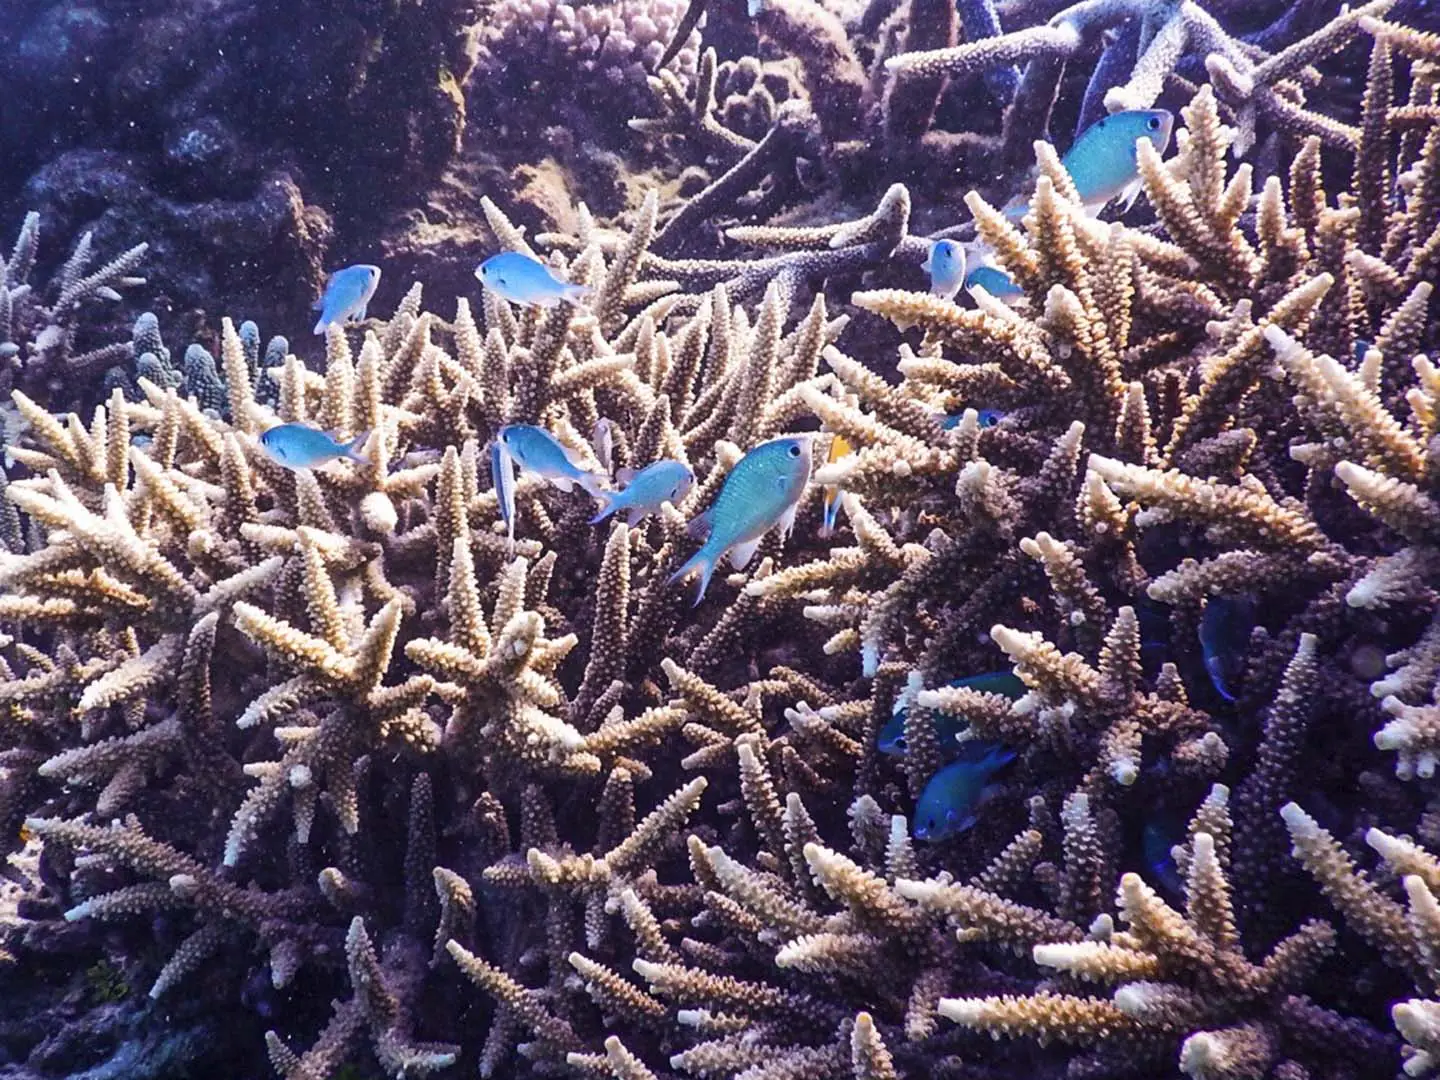 Branching Corals at the Great Barrier Reef